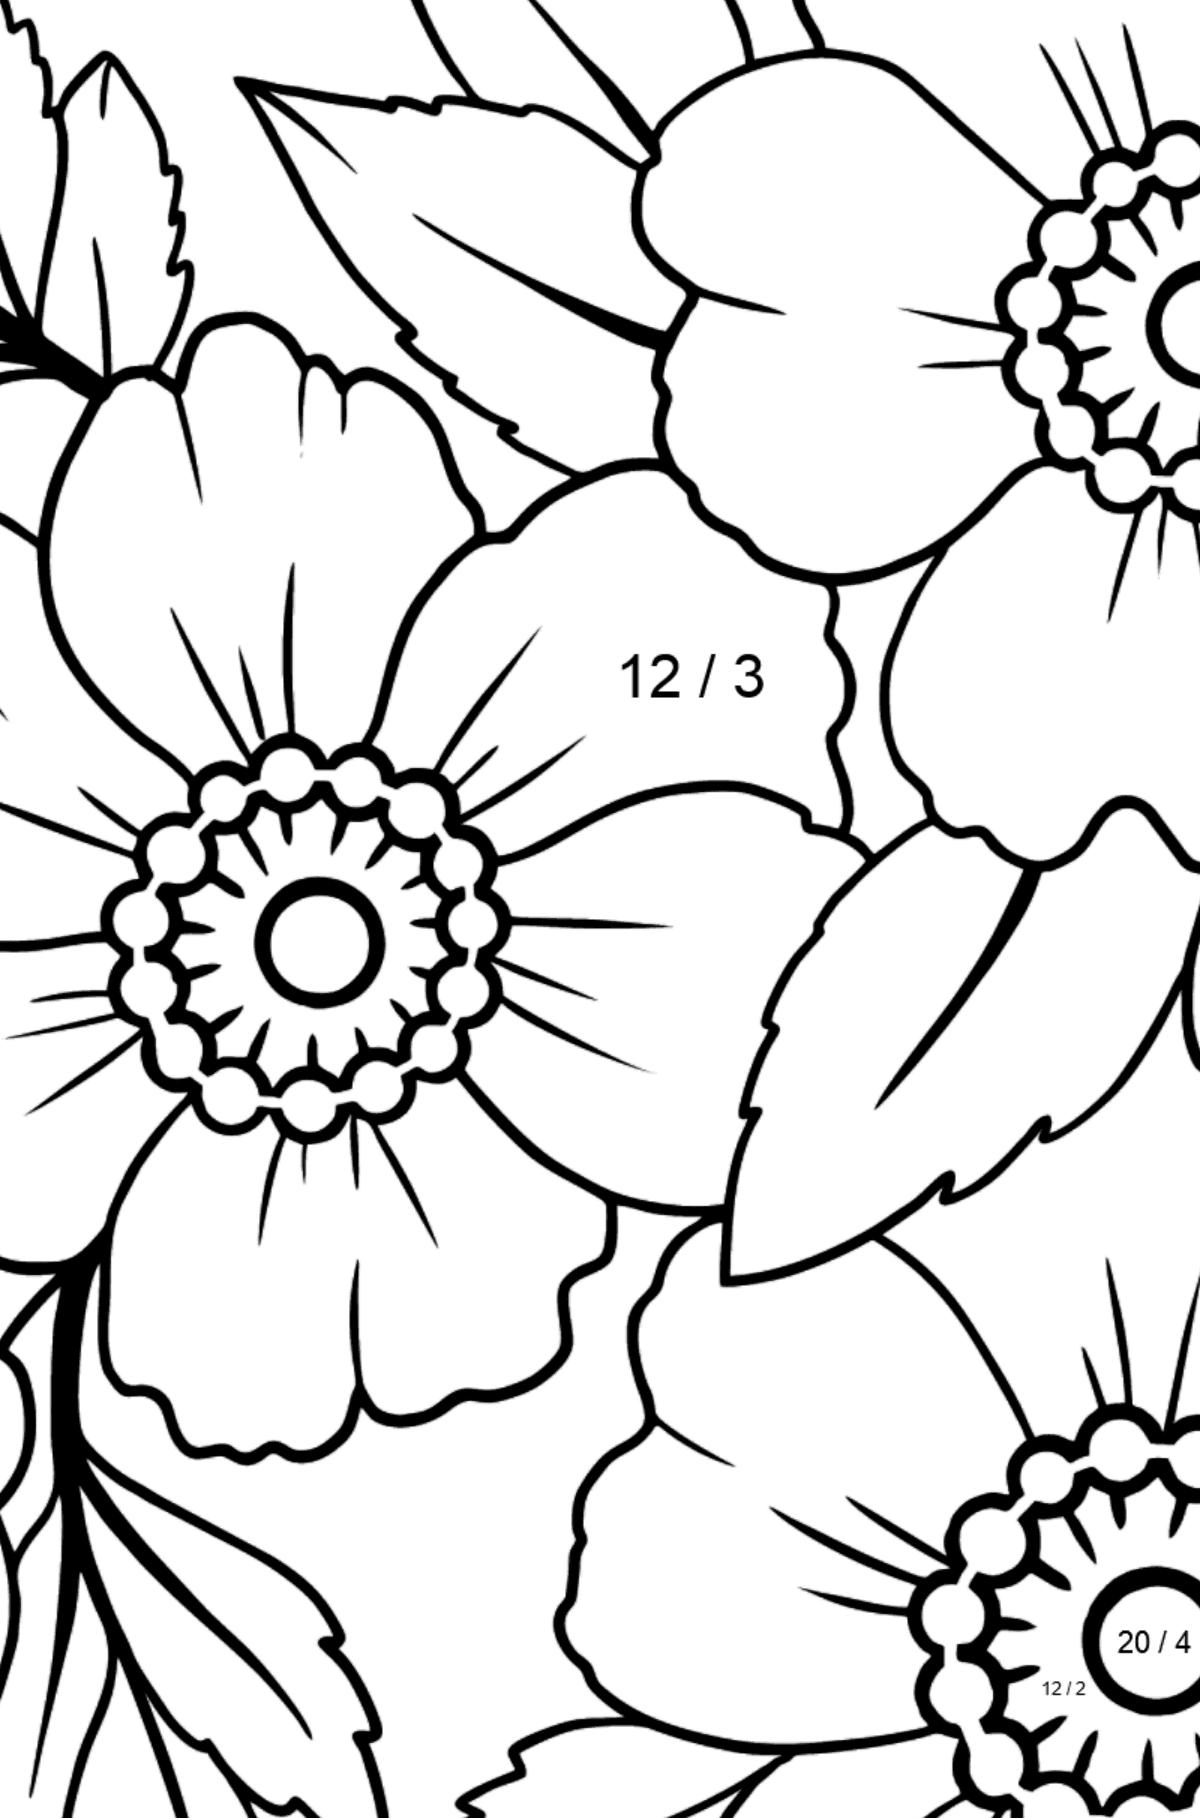 Flower Coloring Page - Japanese Velvet Anemone - Math Coloring - Division for Kids